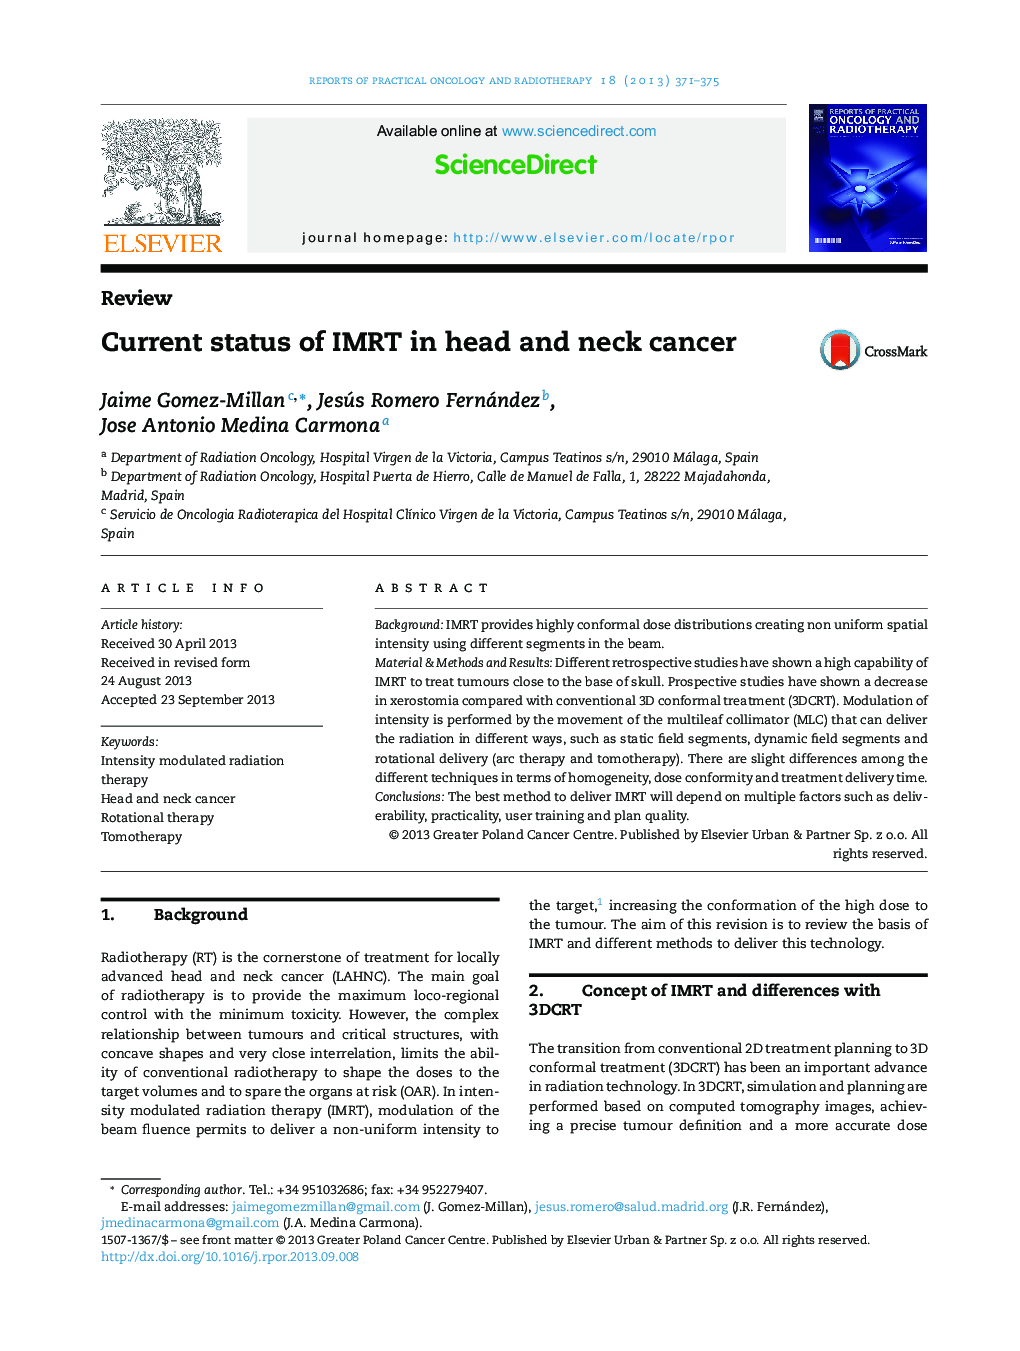 Current status of IMRT in head and neck cancer